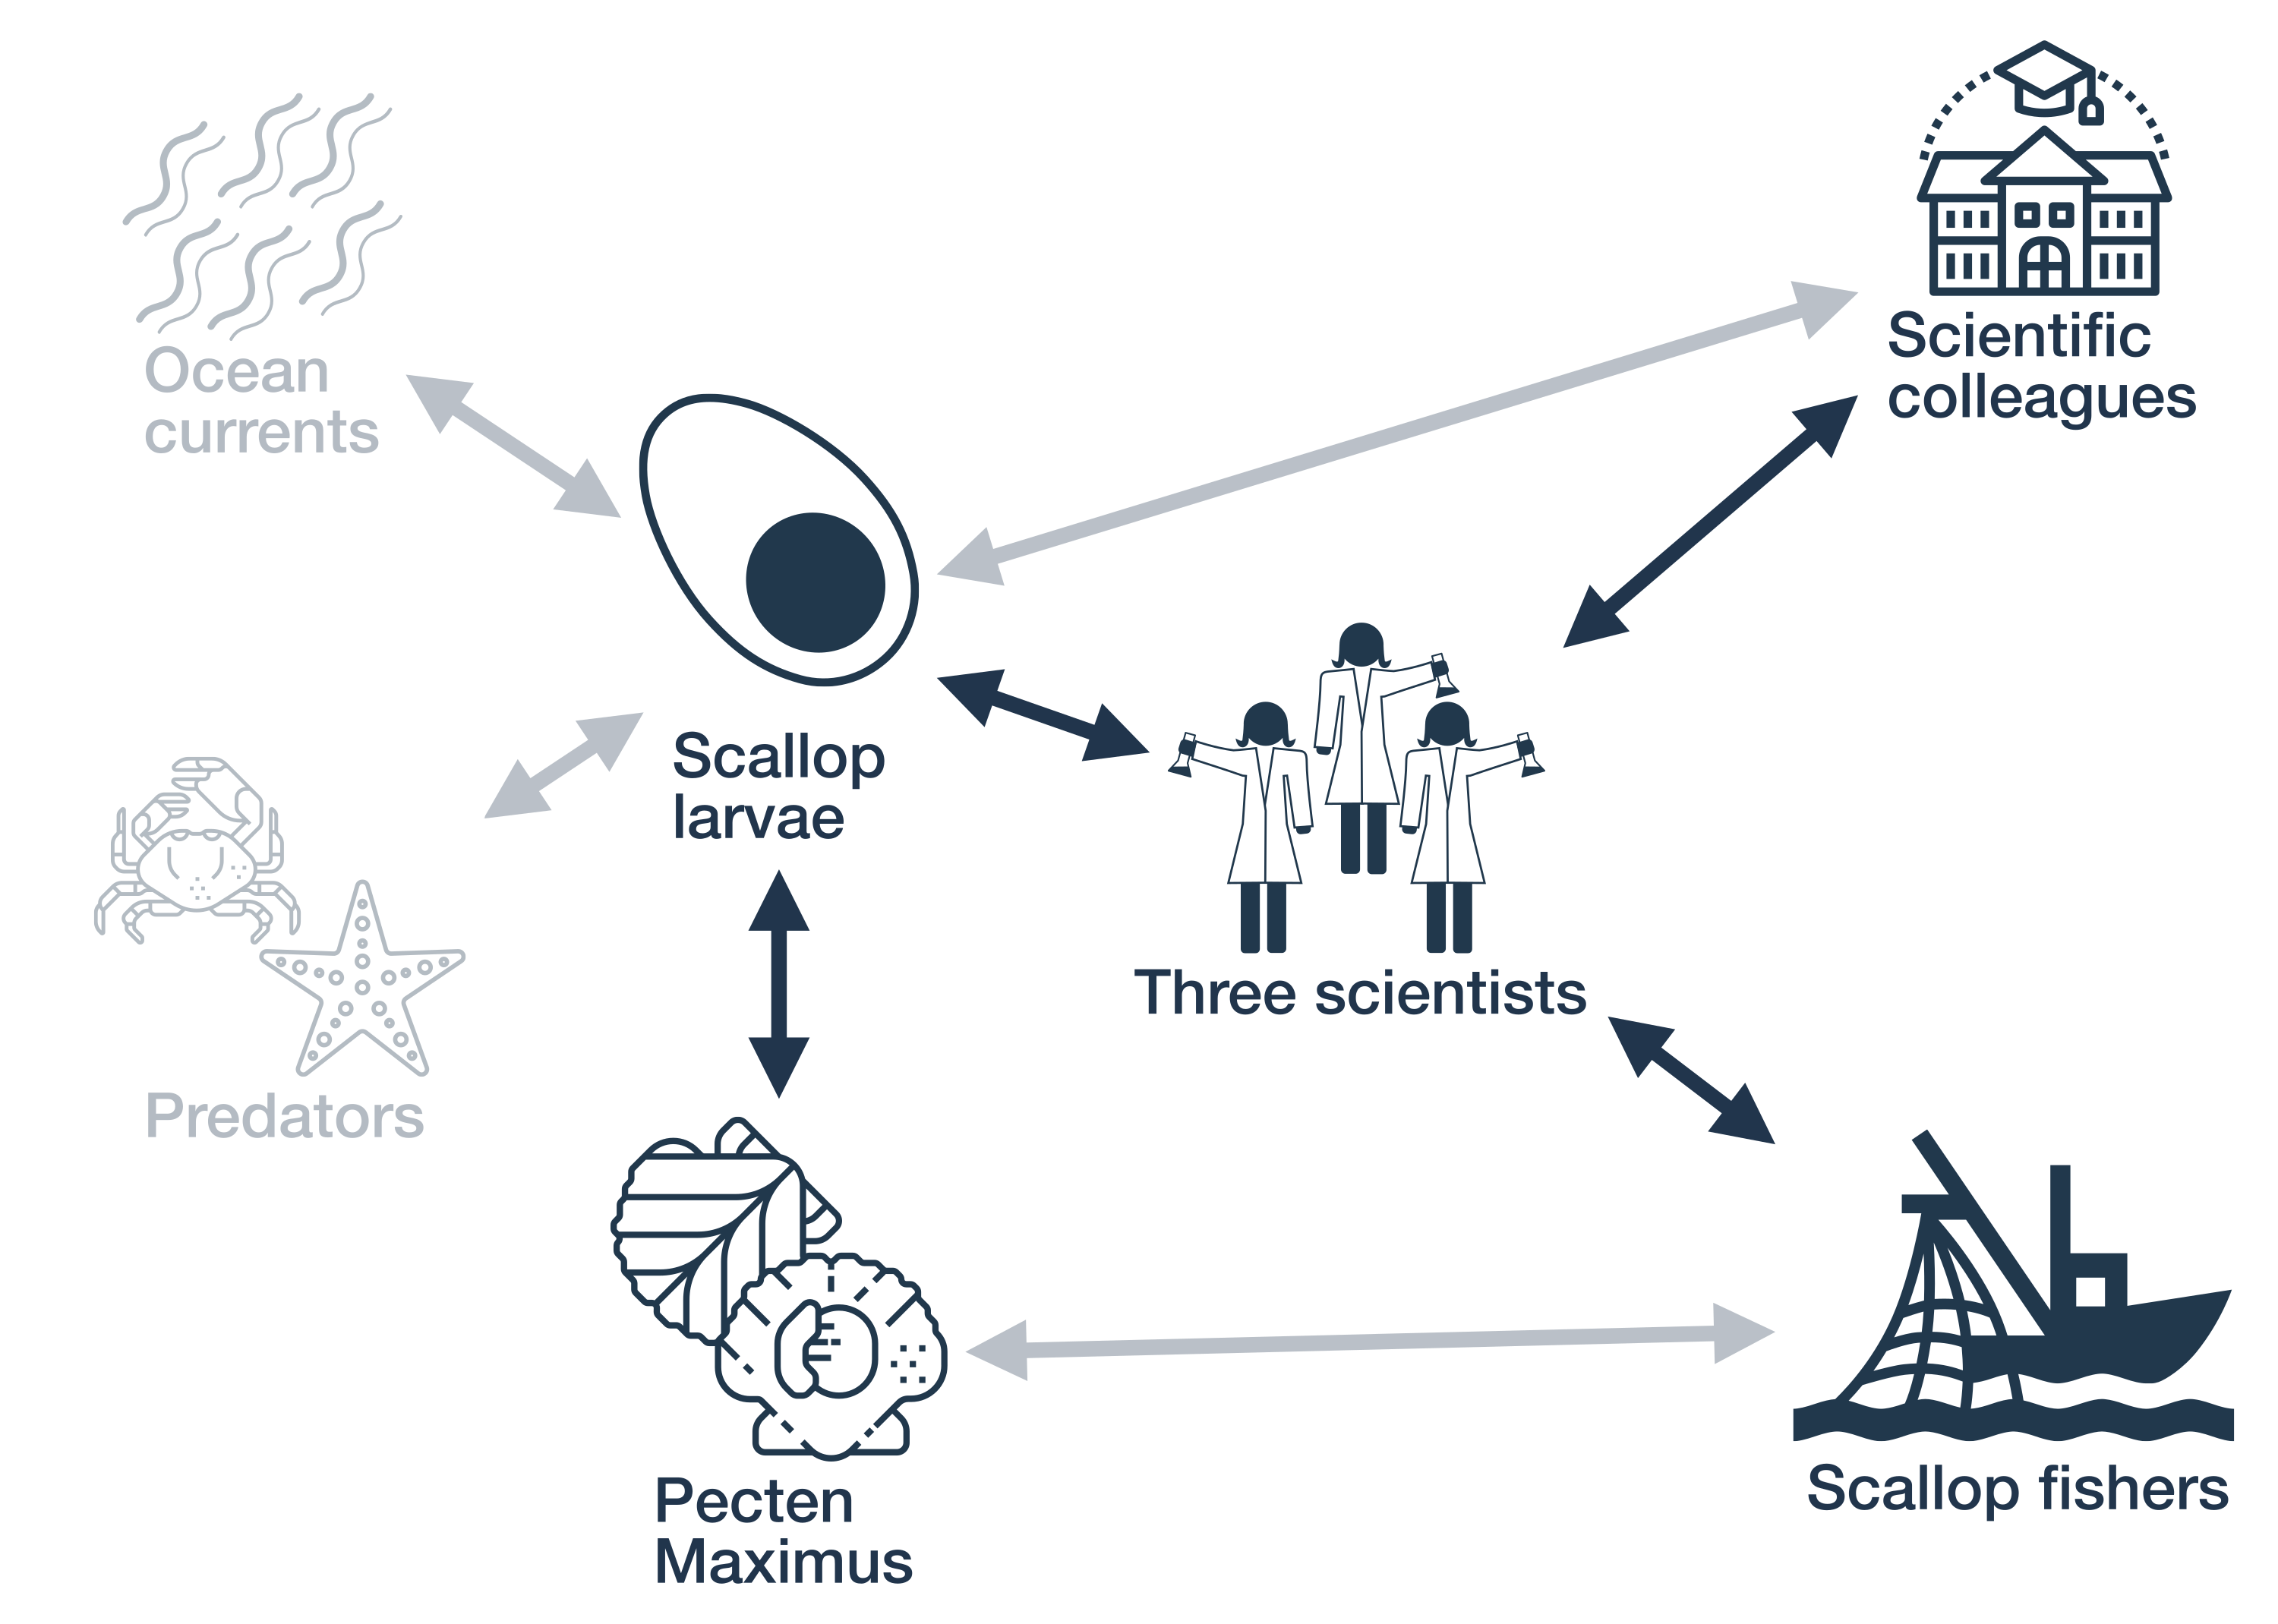 A network diagram showing stylized icons of seven actants: Three scientists, Ocean currents, Scallop larvae, Scientific colleagues, Pecten Maximus, and Scallop fishers. All of the relations except those connecting to the scientists and the relation between the scallop larvae and the pecten maximus are faded.